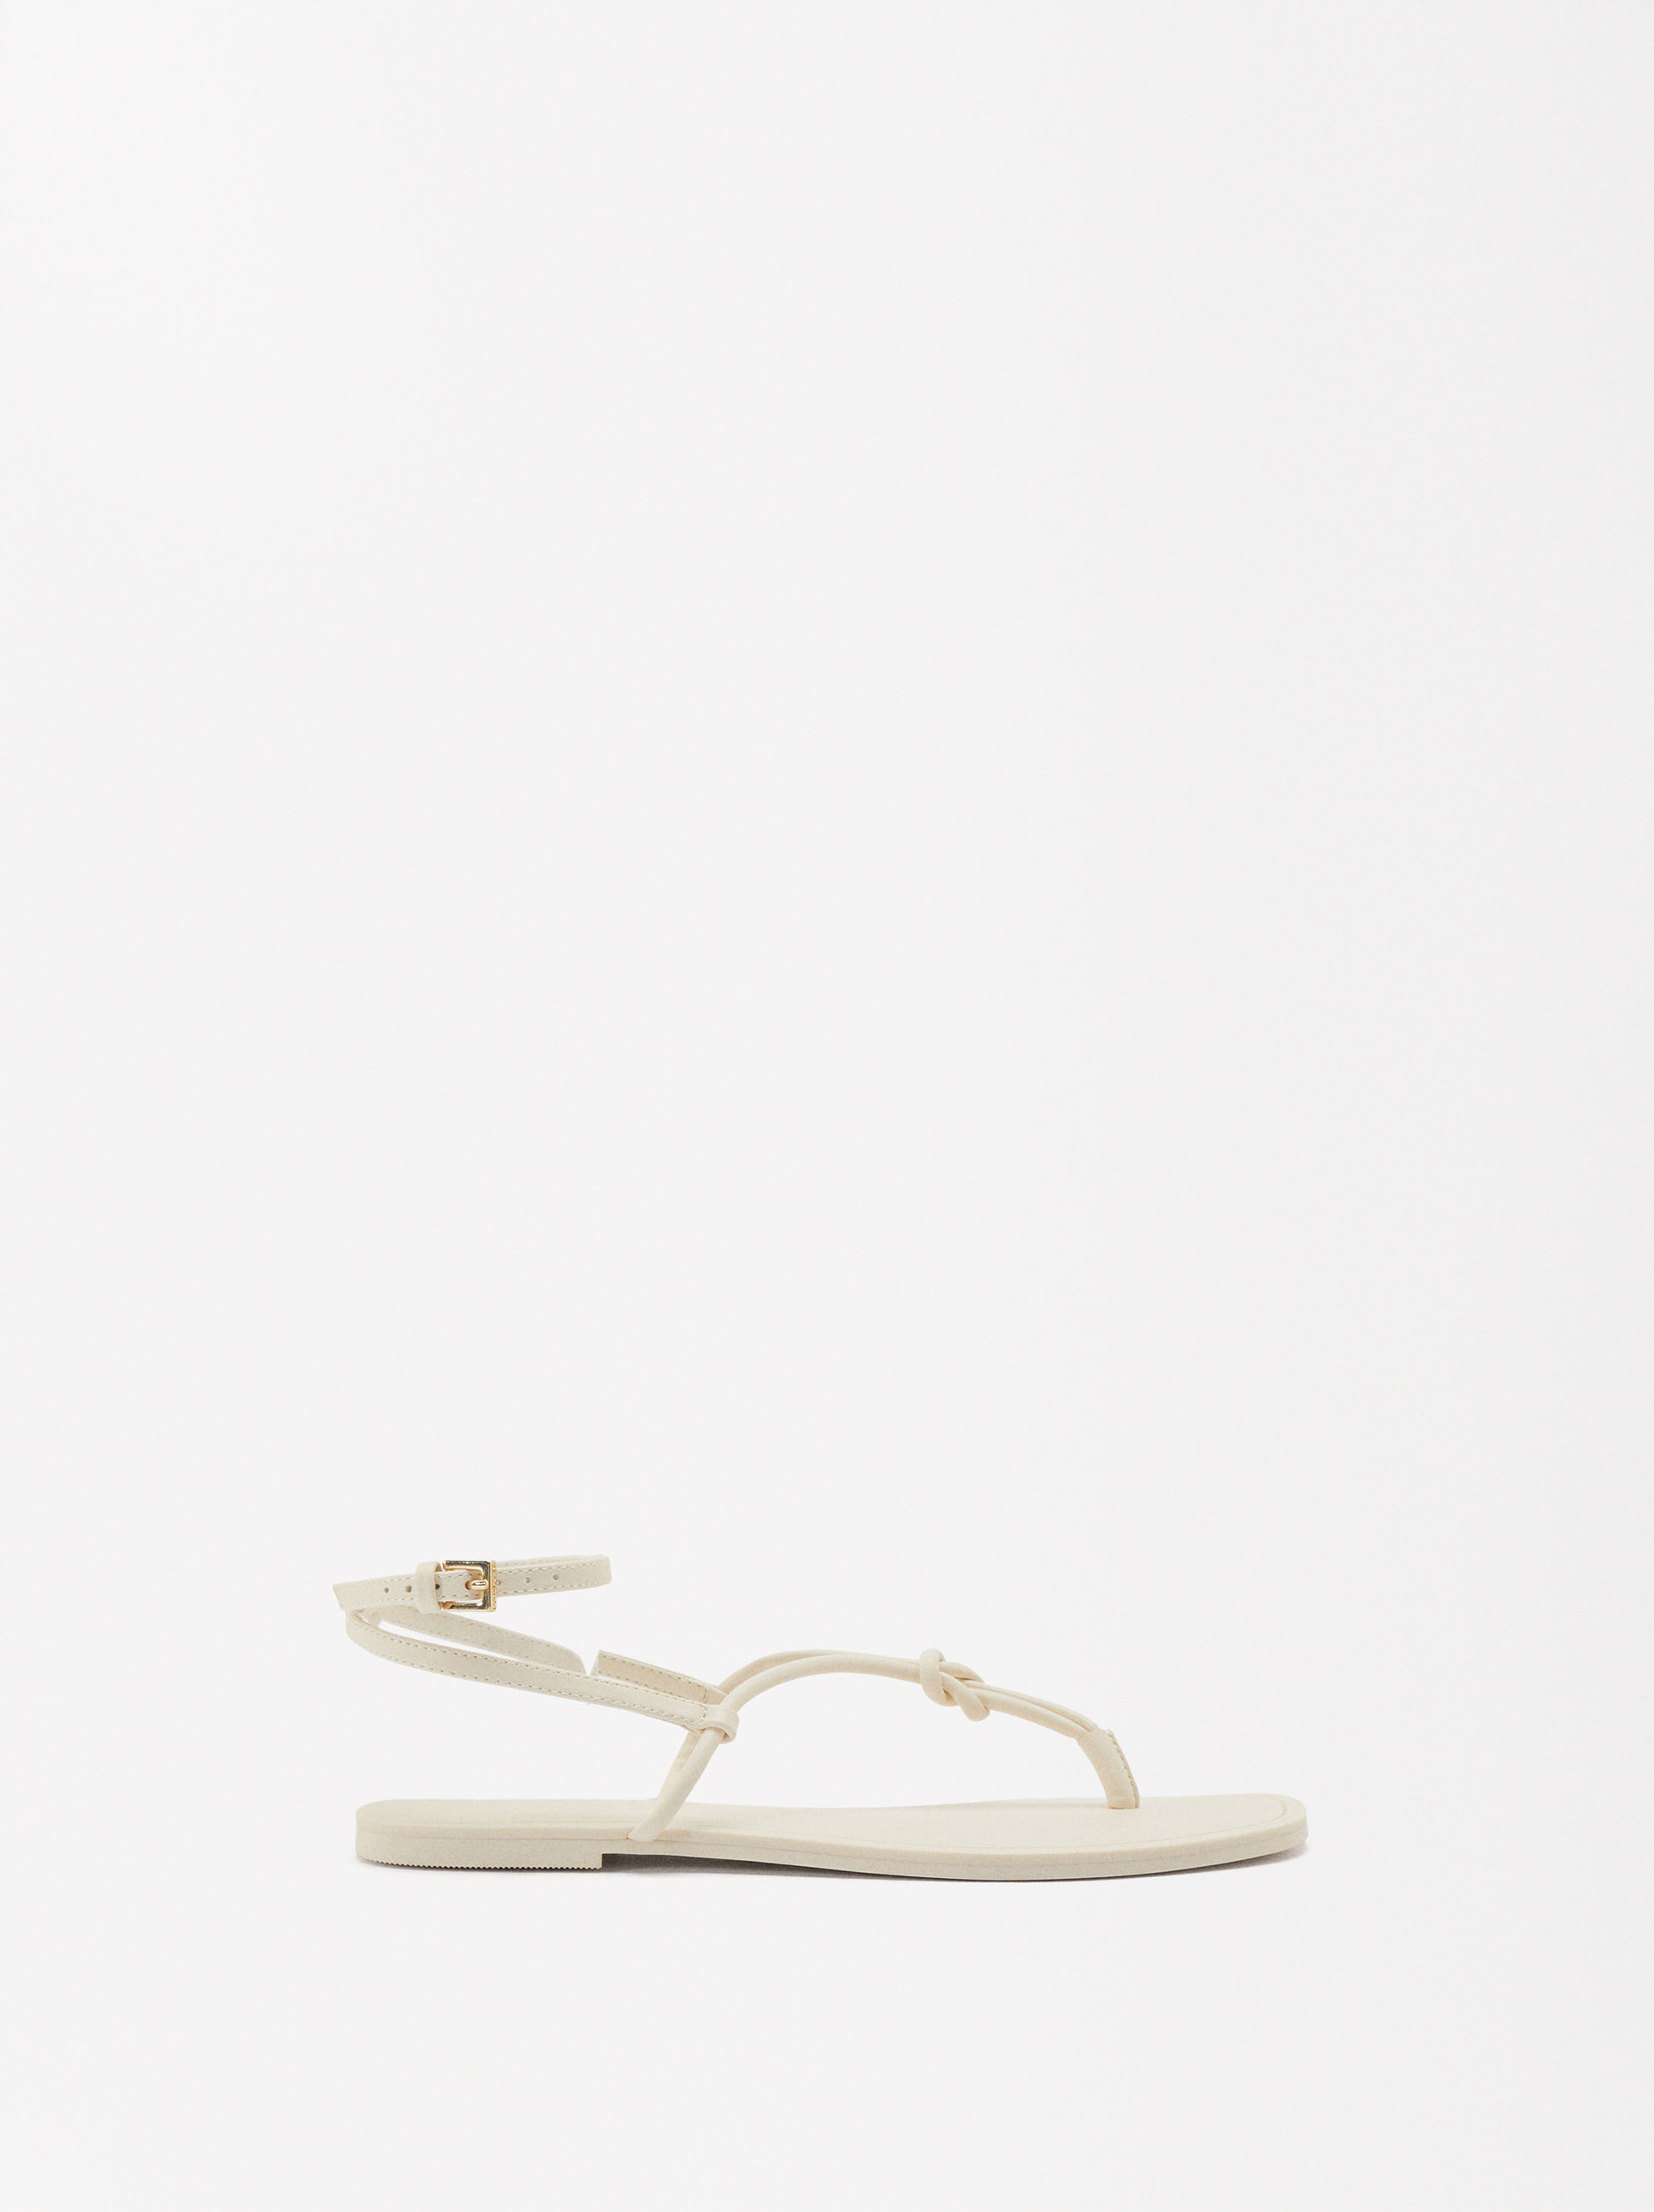 Flat Strappy Sandals image number 0.0